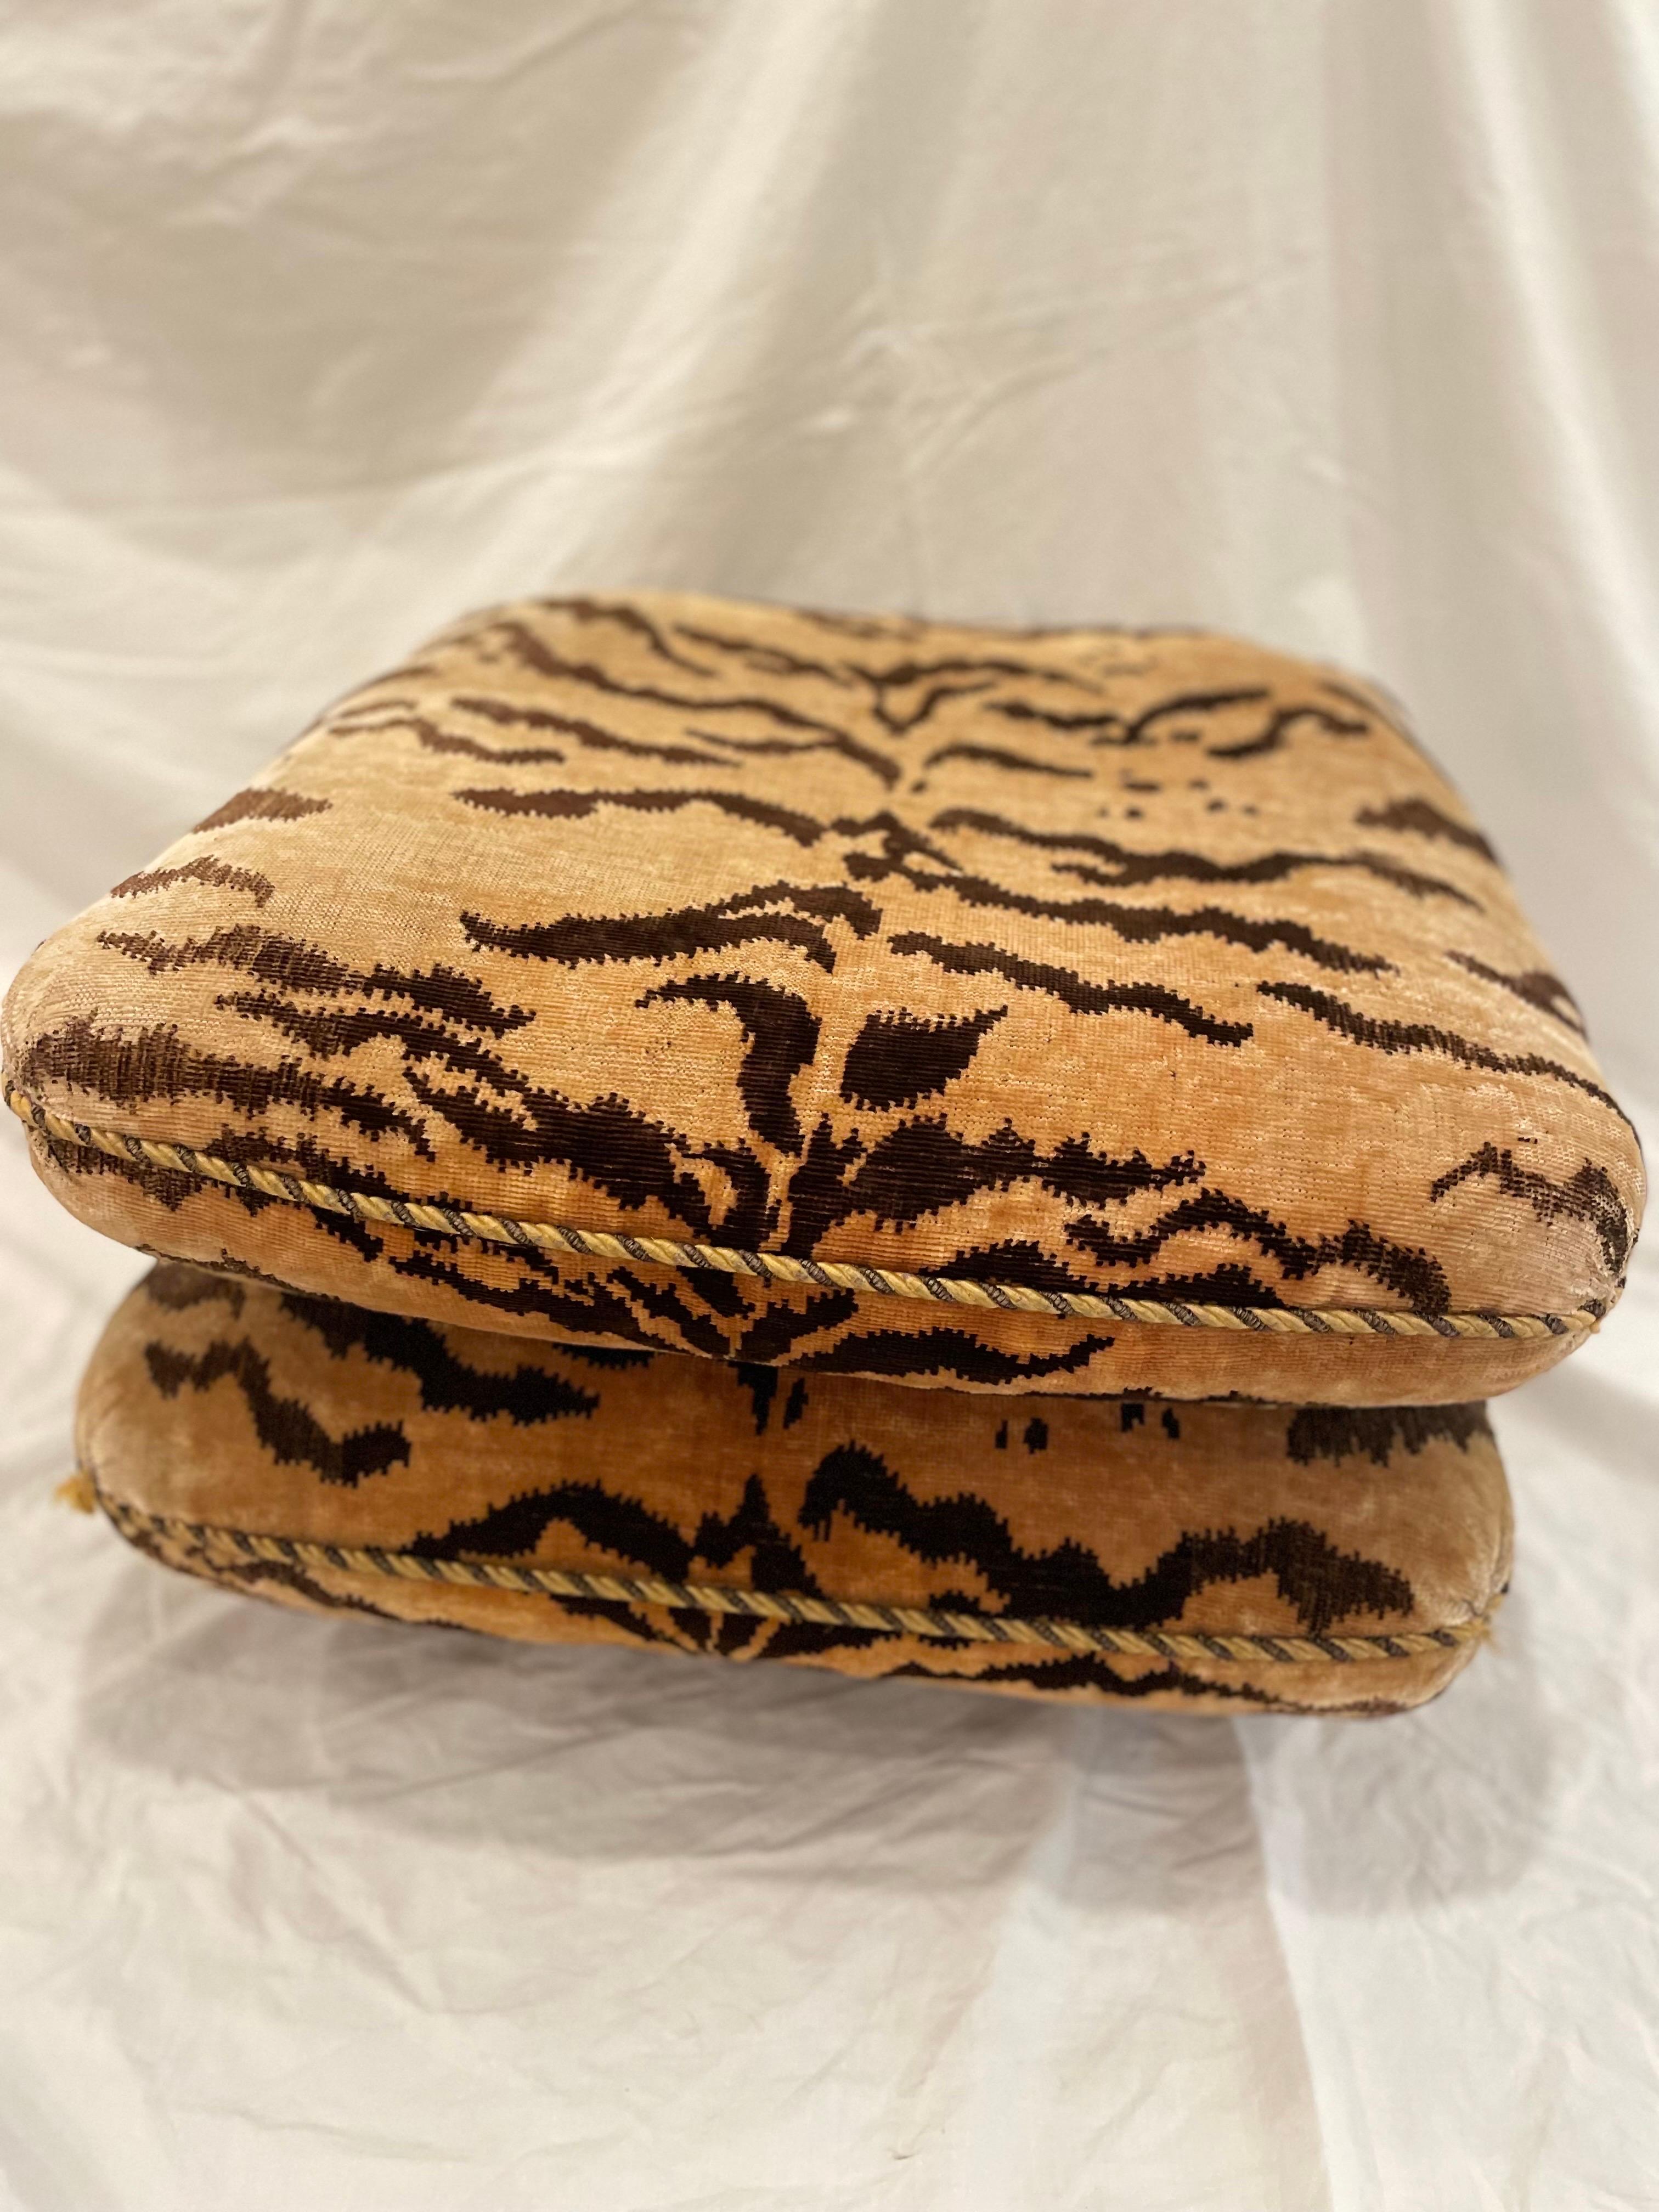 This beautiful rare Scalamandré Le Tigre Ottoman from the 1960's is straight from the source of Scalamandre silk velvet itself - Italy.  Sourced from estate of a lady whom brought it with her from Italy when she moved to America in the 1970's. 

As